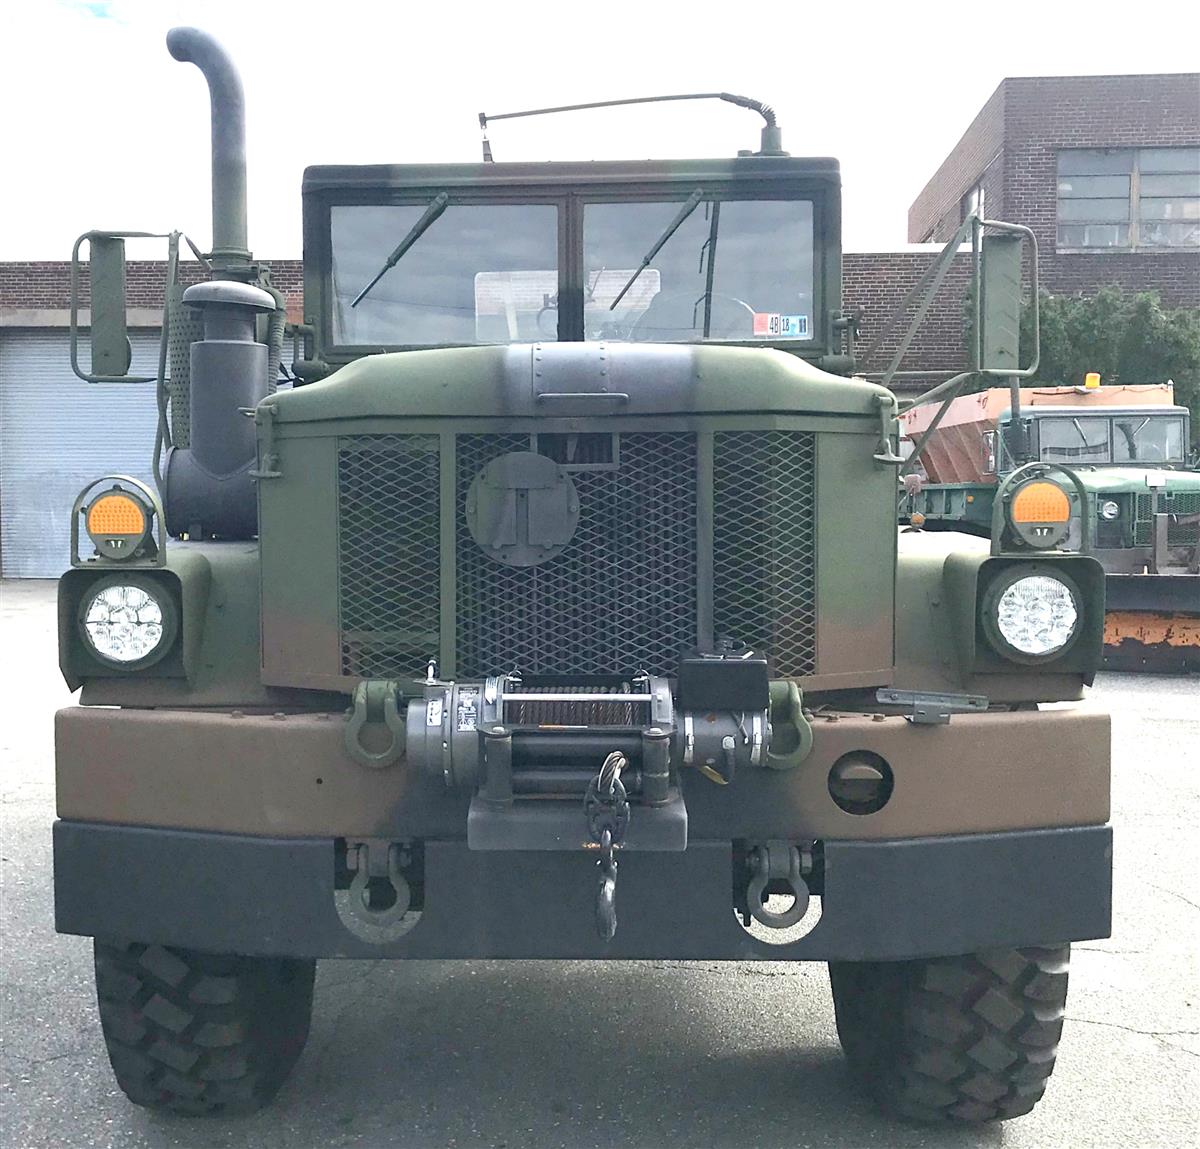 T-09242018-11 | Bobbed AM General M35A3 With 24V Winch (2).JPG